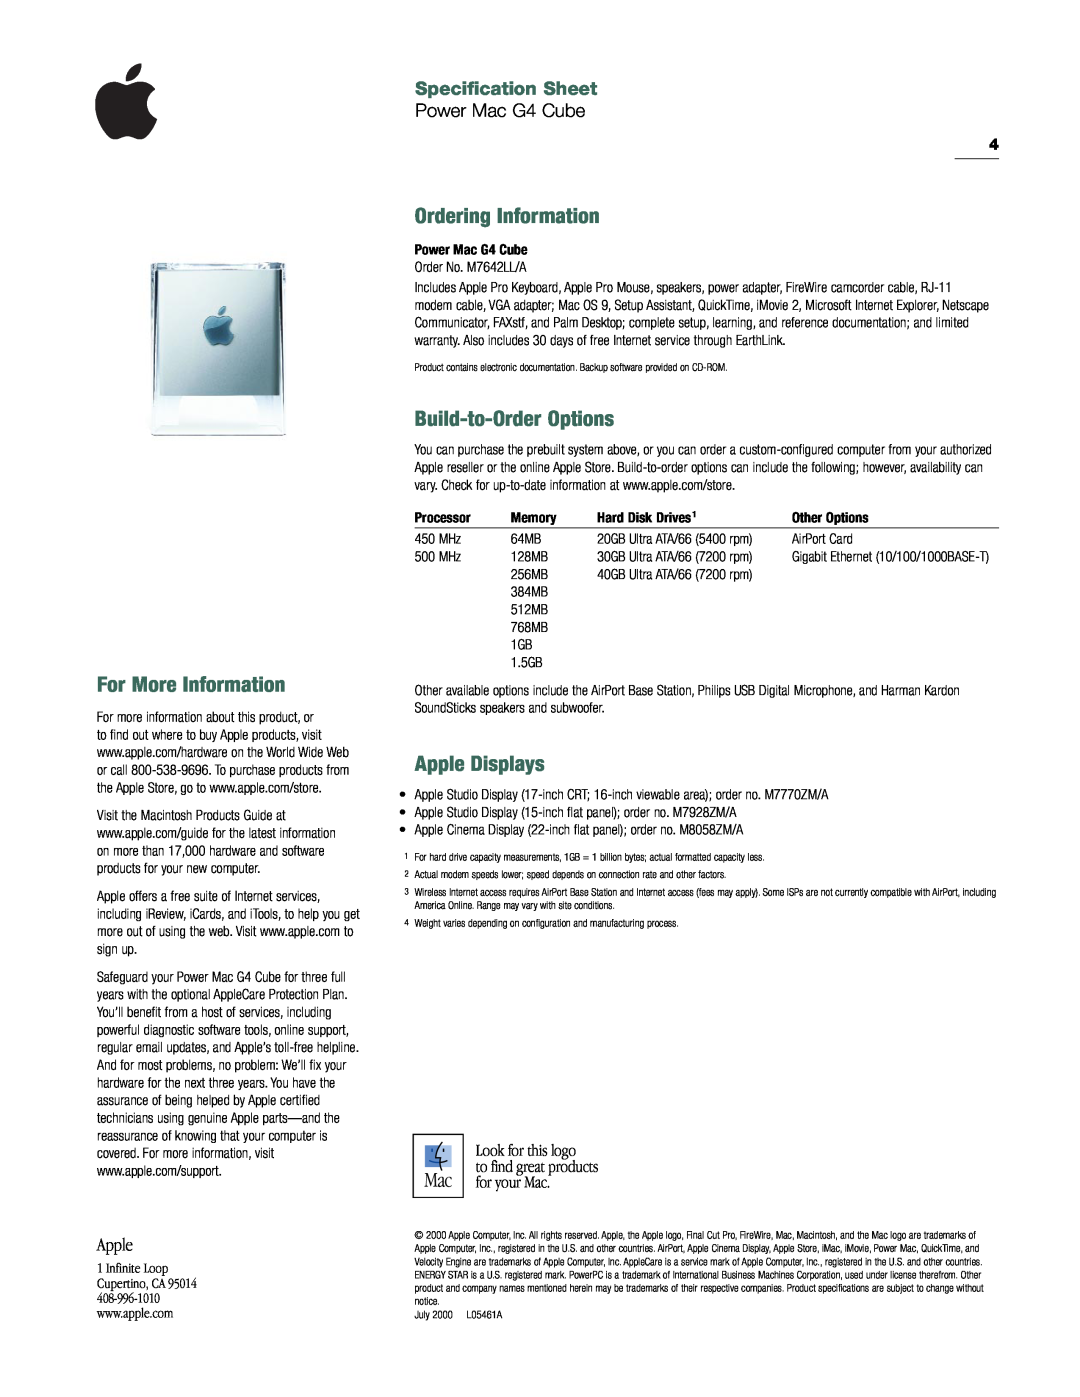 Apple G4 manual For More Information, Ordering Information, Build-to-Order Options, Apple Displays, Look for this logo 